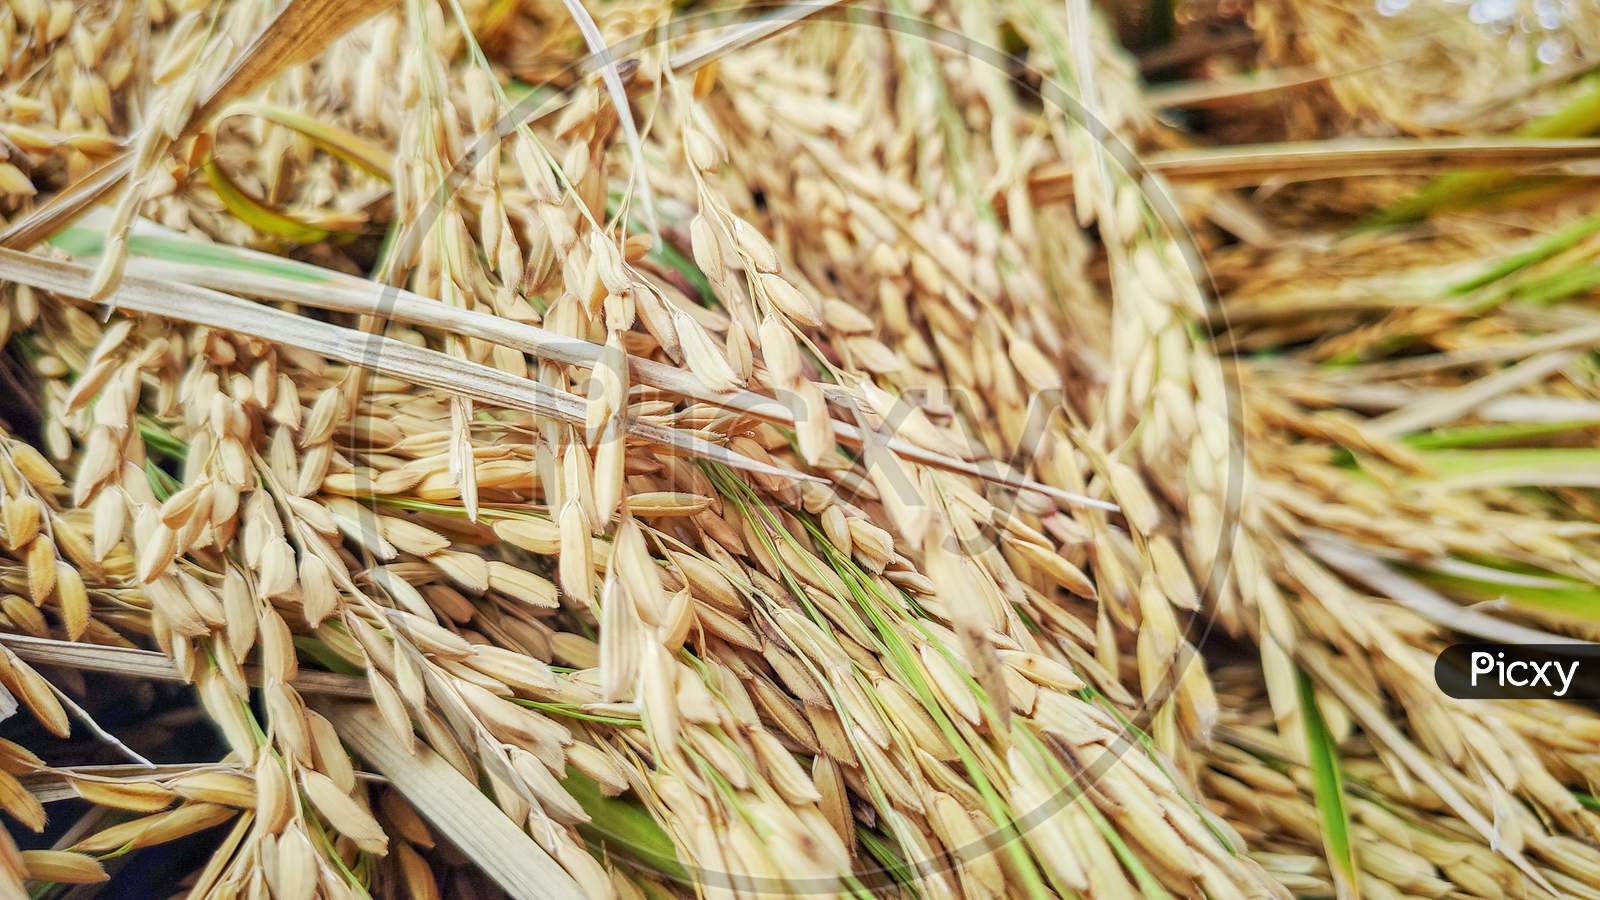 image of harvested paddy grain background